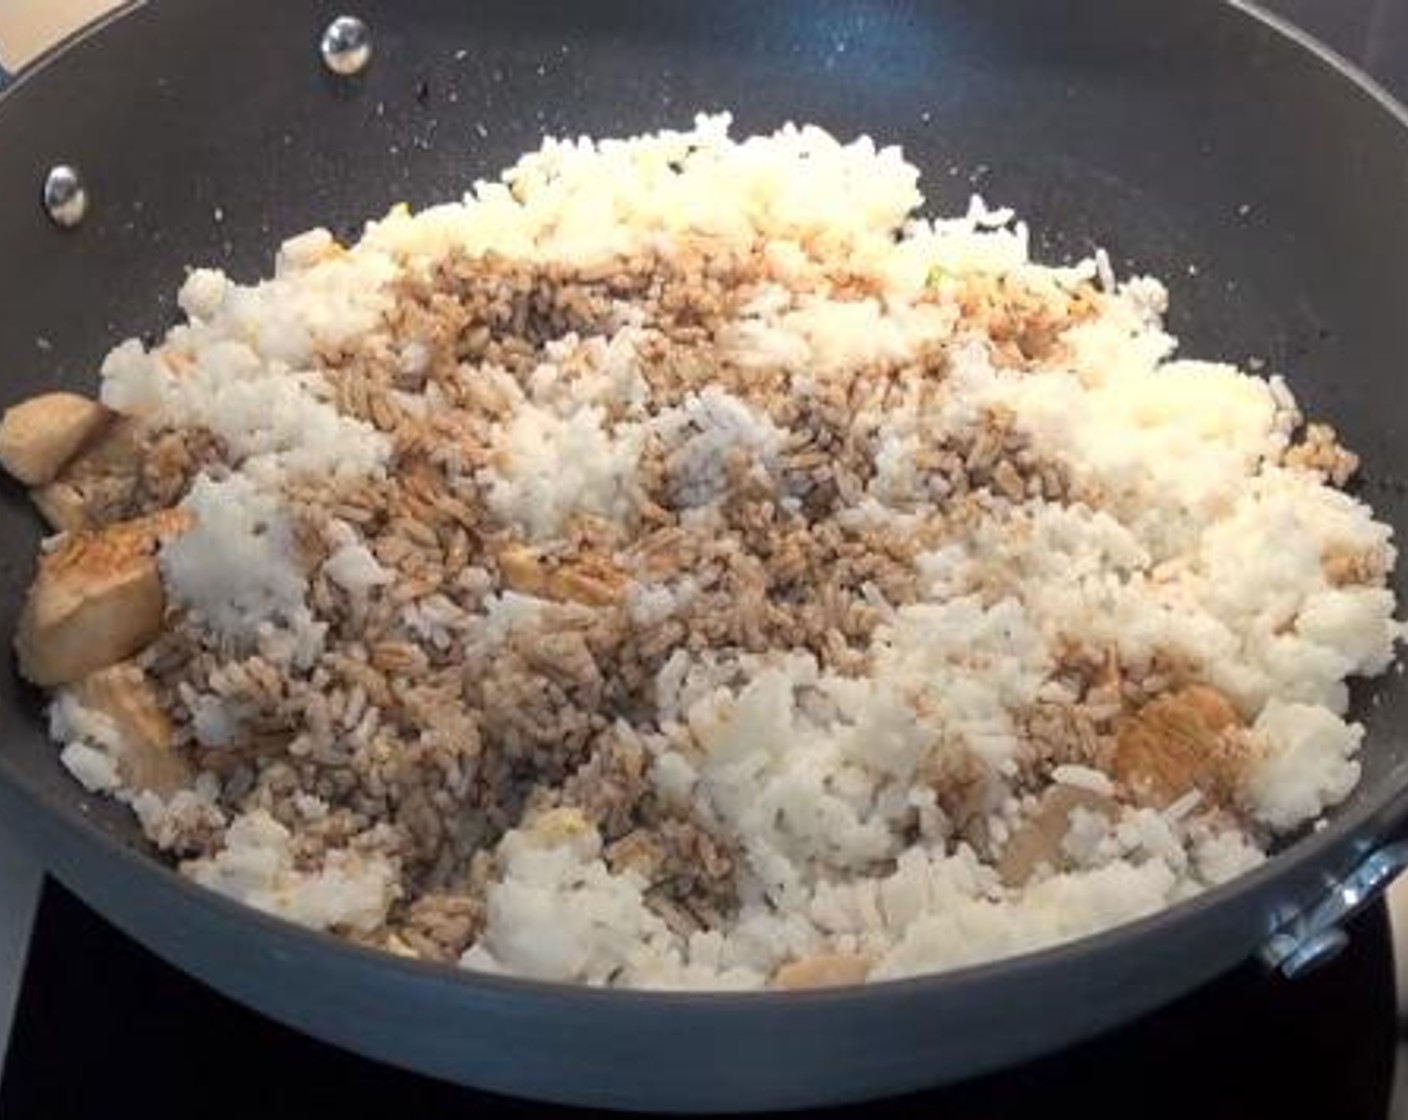 step 3 Add in the Eggs (2), and cook for a few minutes. Then, add in the chicken, and cooked White Rice (1 cup) into the wok. Sprinkle over with some Soy Sauce (1/4 cup), and mix everything together.